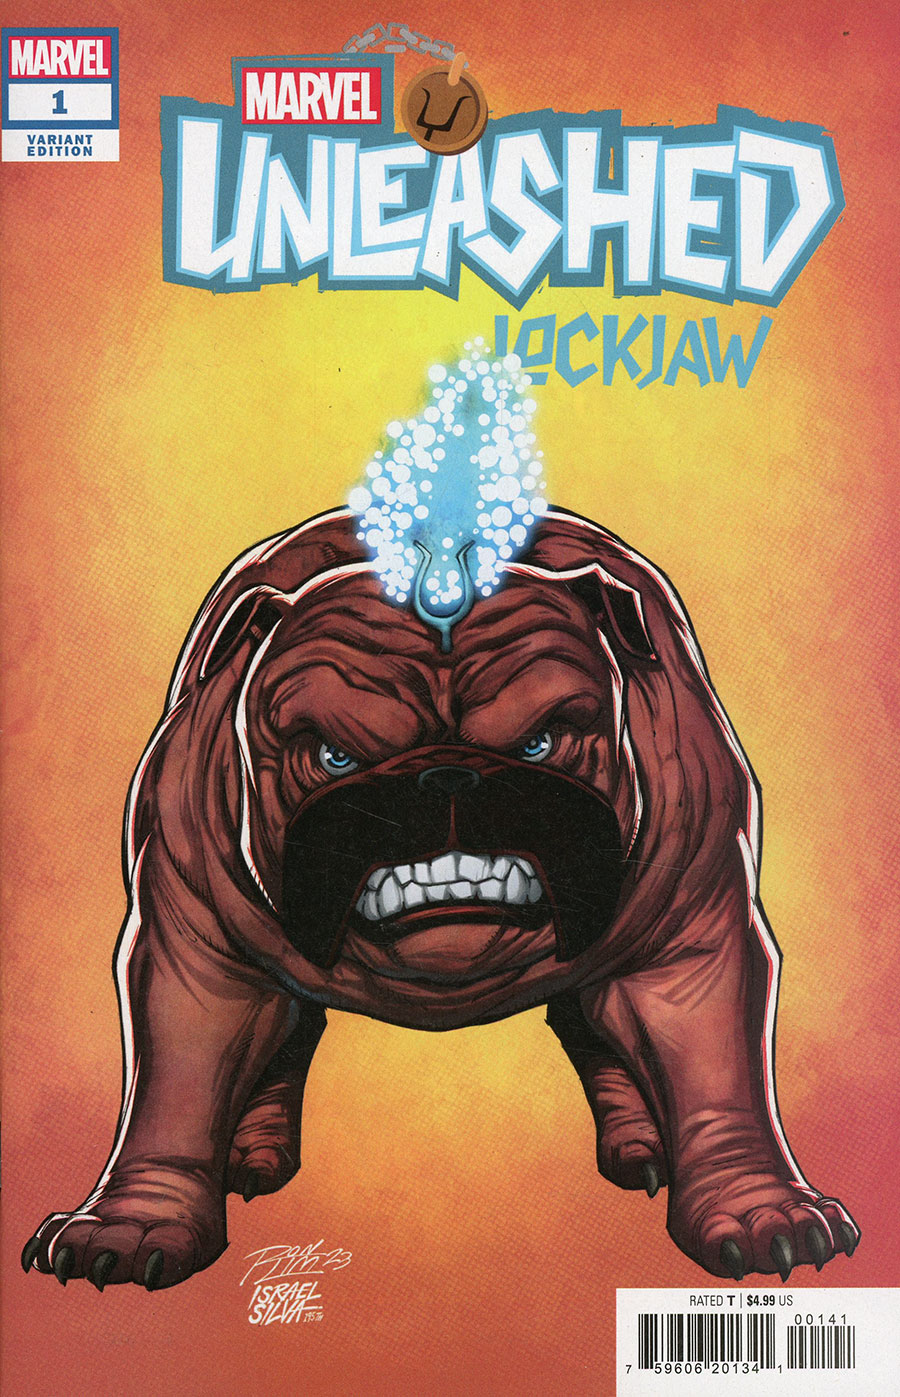 Marvel Unleashed #1 Cover C Variant Ron Lim Lockjaw Cover